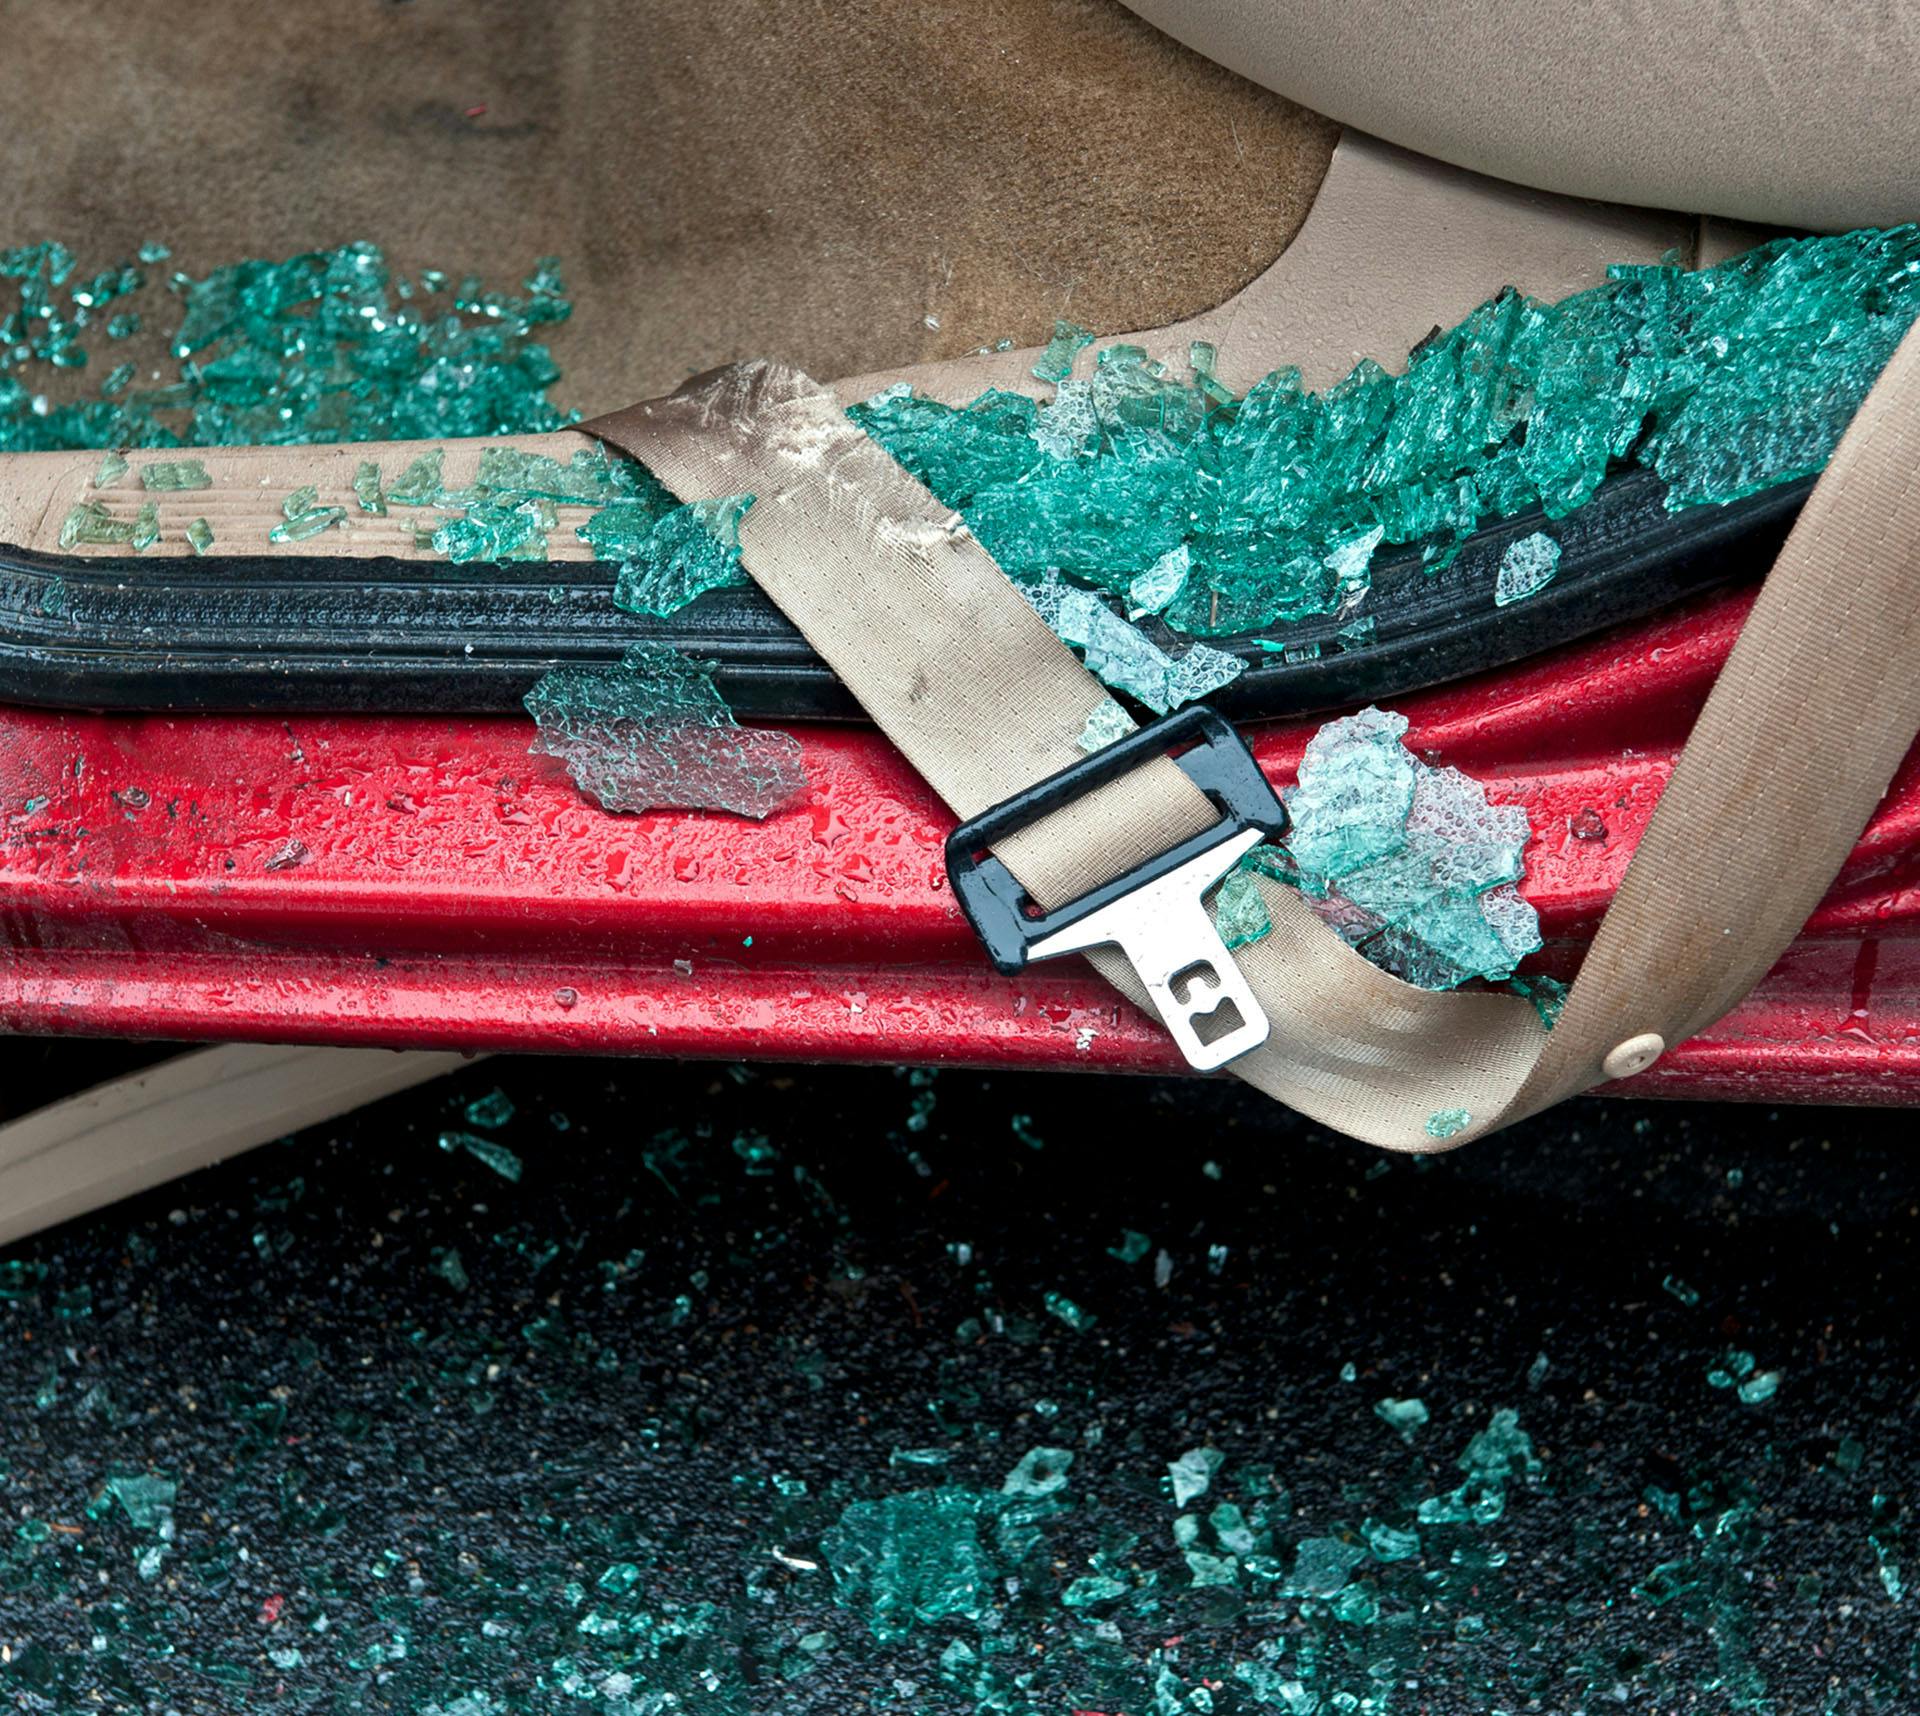 Car with shattered window and broken seatbelt